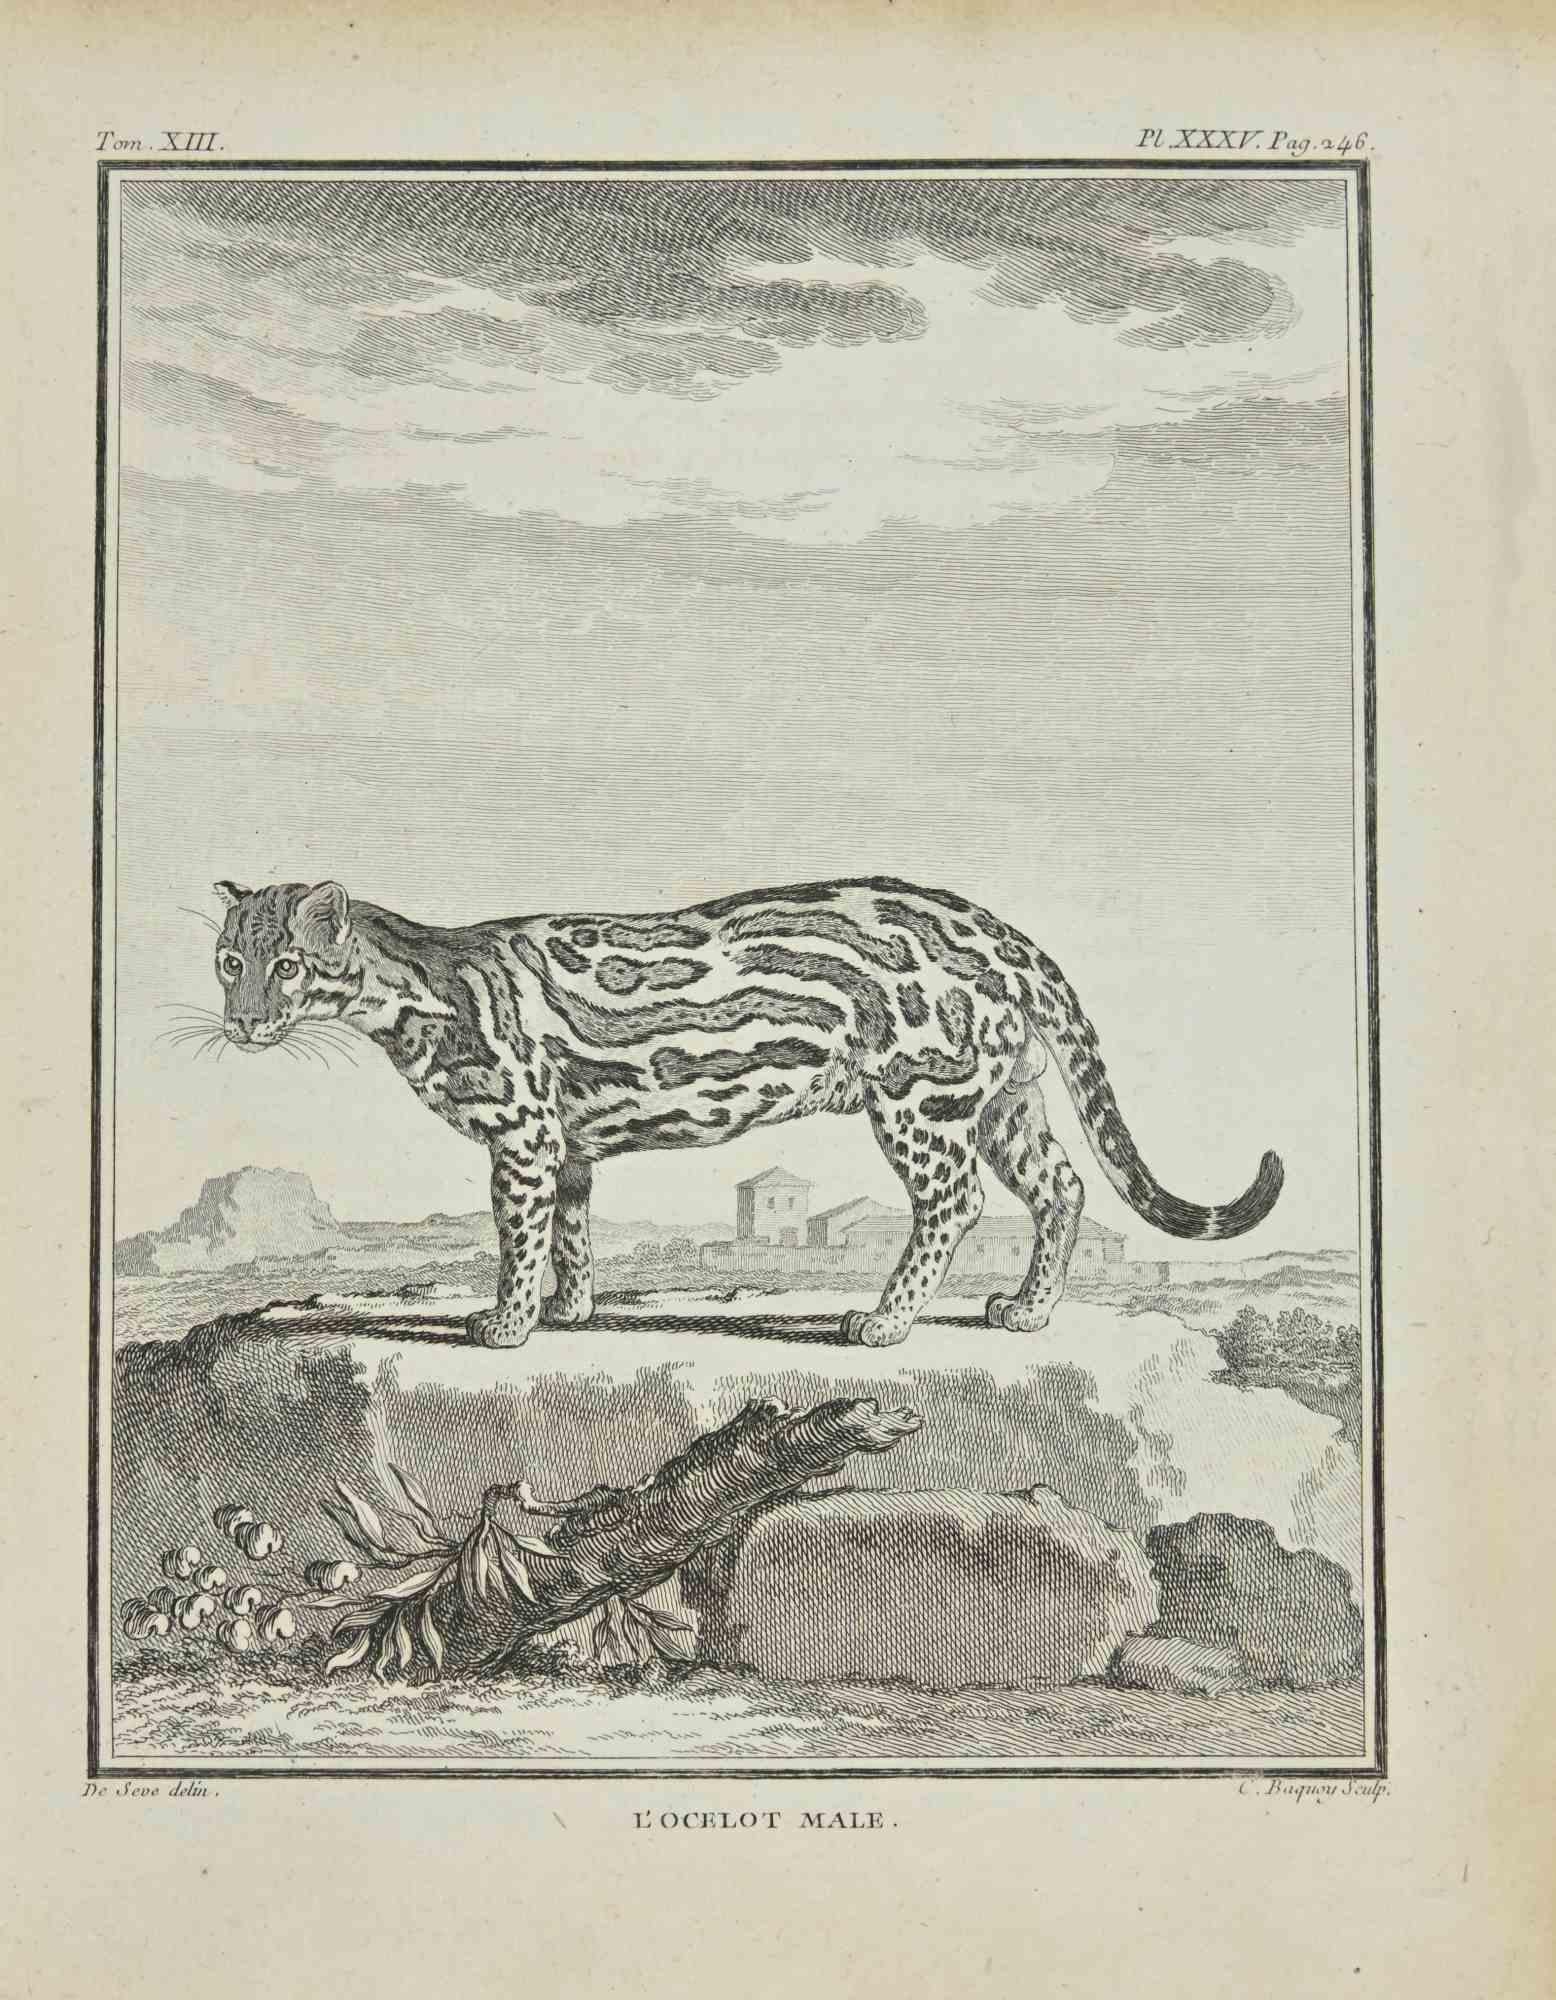 L'Ocelot is an etching realized by Jean Charles Baquoy in 1771.

It belongs to the suite "Histoire Naturelle de Buffon".

The Artist's signature is engraved lower right.

Good conditions.
